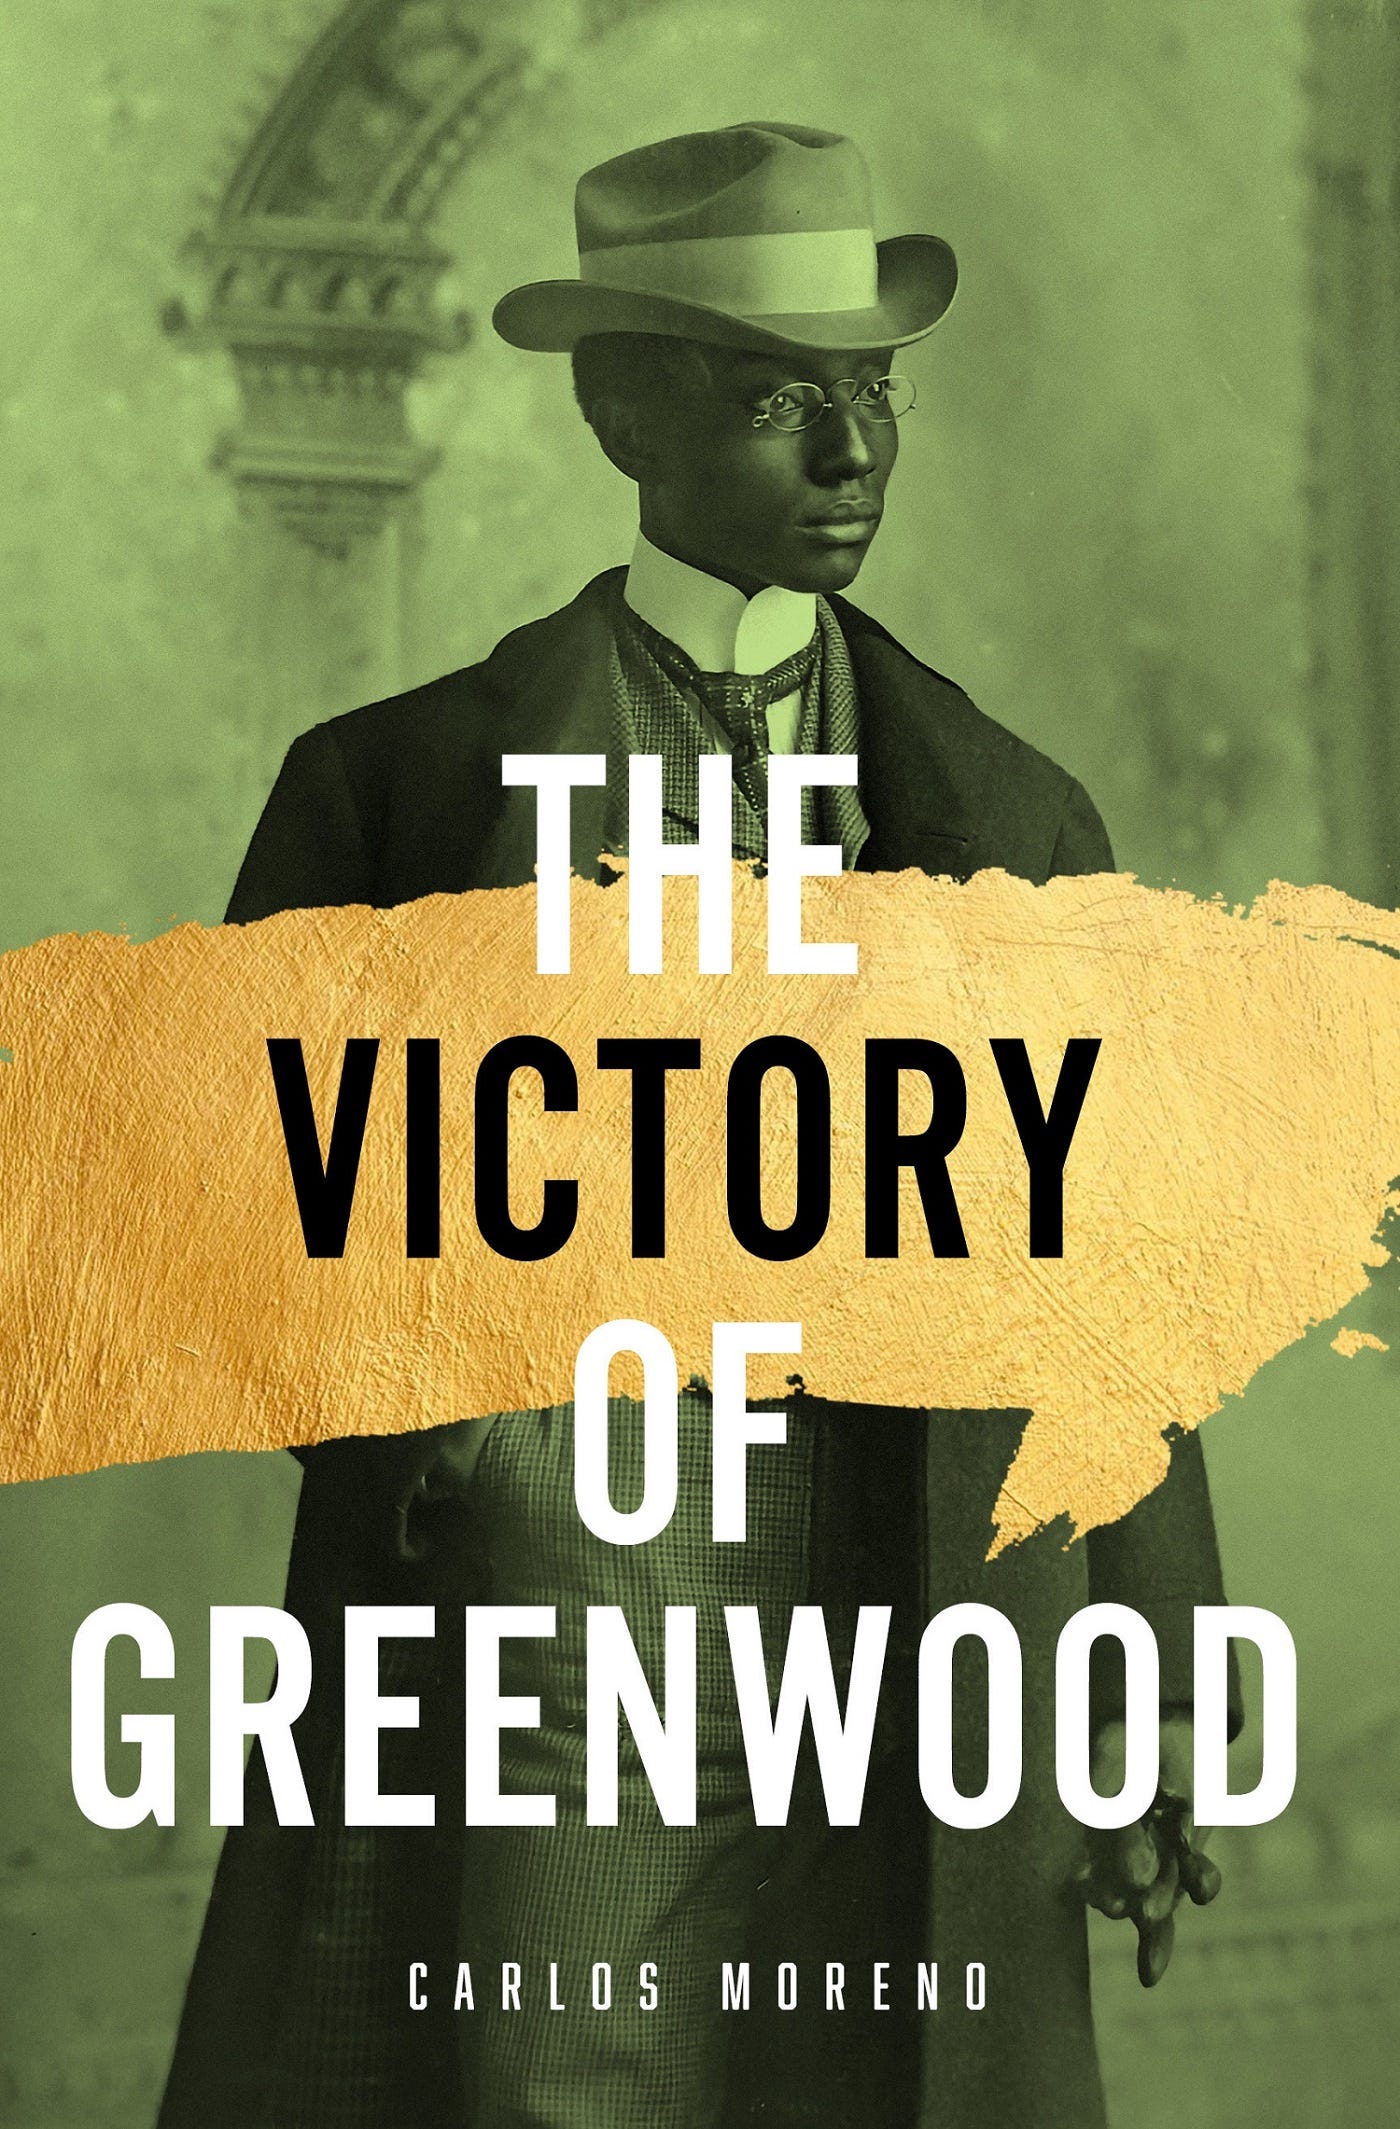 In "The Victory of Greenwood," Tulsan Carlos Moreno invites readers to learn more about the full history of the Greenwood community through the lives of some of its most prominent figures, including John and Loula Williams, B.C. Franklin and Rev. Ben H. Hill.